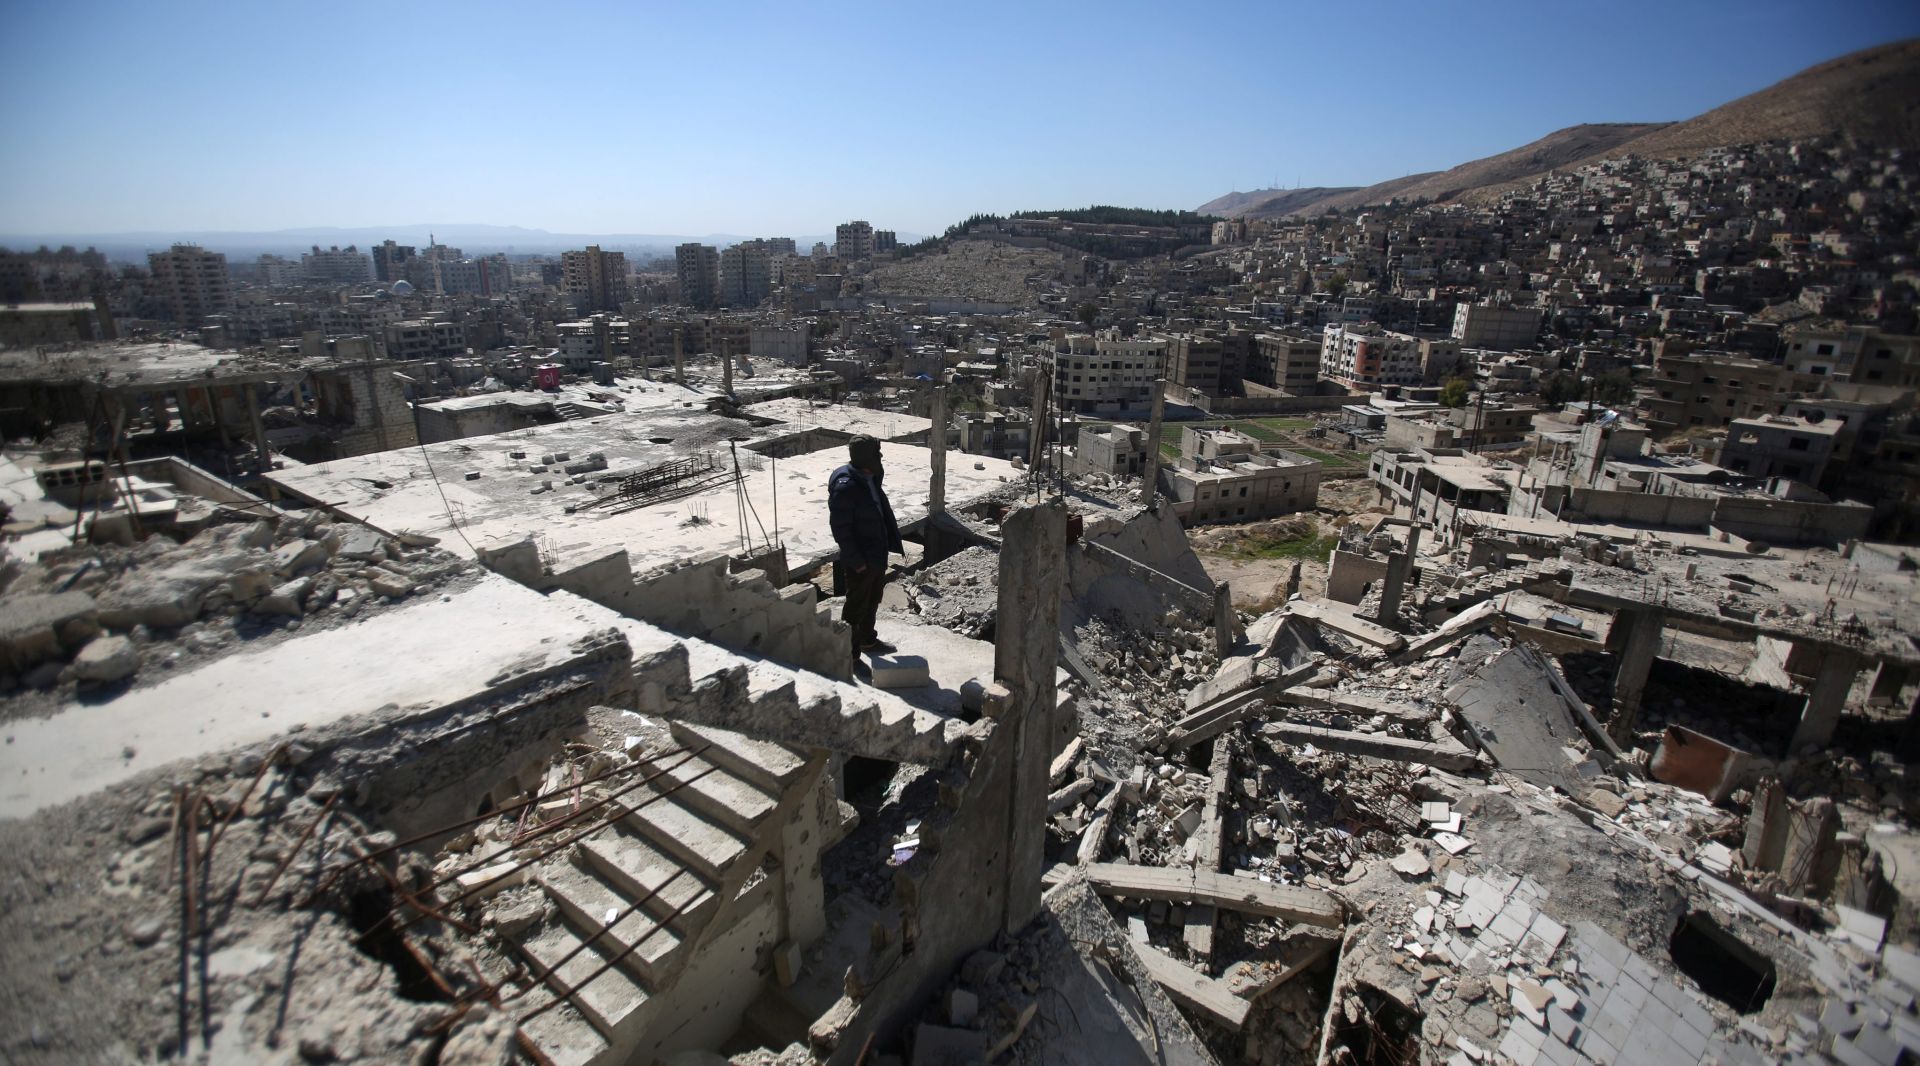 epa05166107 A Syrian man stands on top of a damaged building overlooking the Esh Al-Warwar neighborhood (background), in Barzeh neighborhood of Damascus, Syria, 17 February 2016. Barzeh neighborhood is controlled by rebels while the nearby Esh Al-Warwar is under control of Syrian government forces. A ceasefire is in effect between the two neighborhoods.  EPA/MOHAMMED BADRA